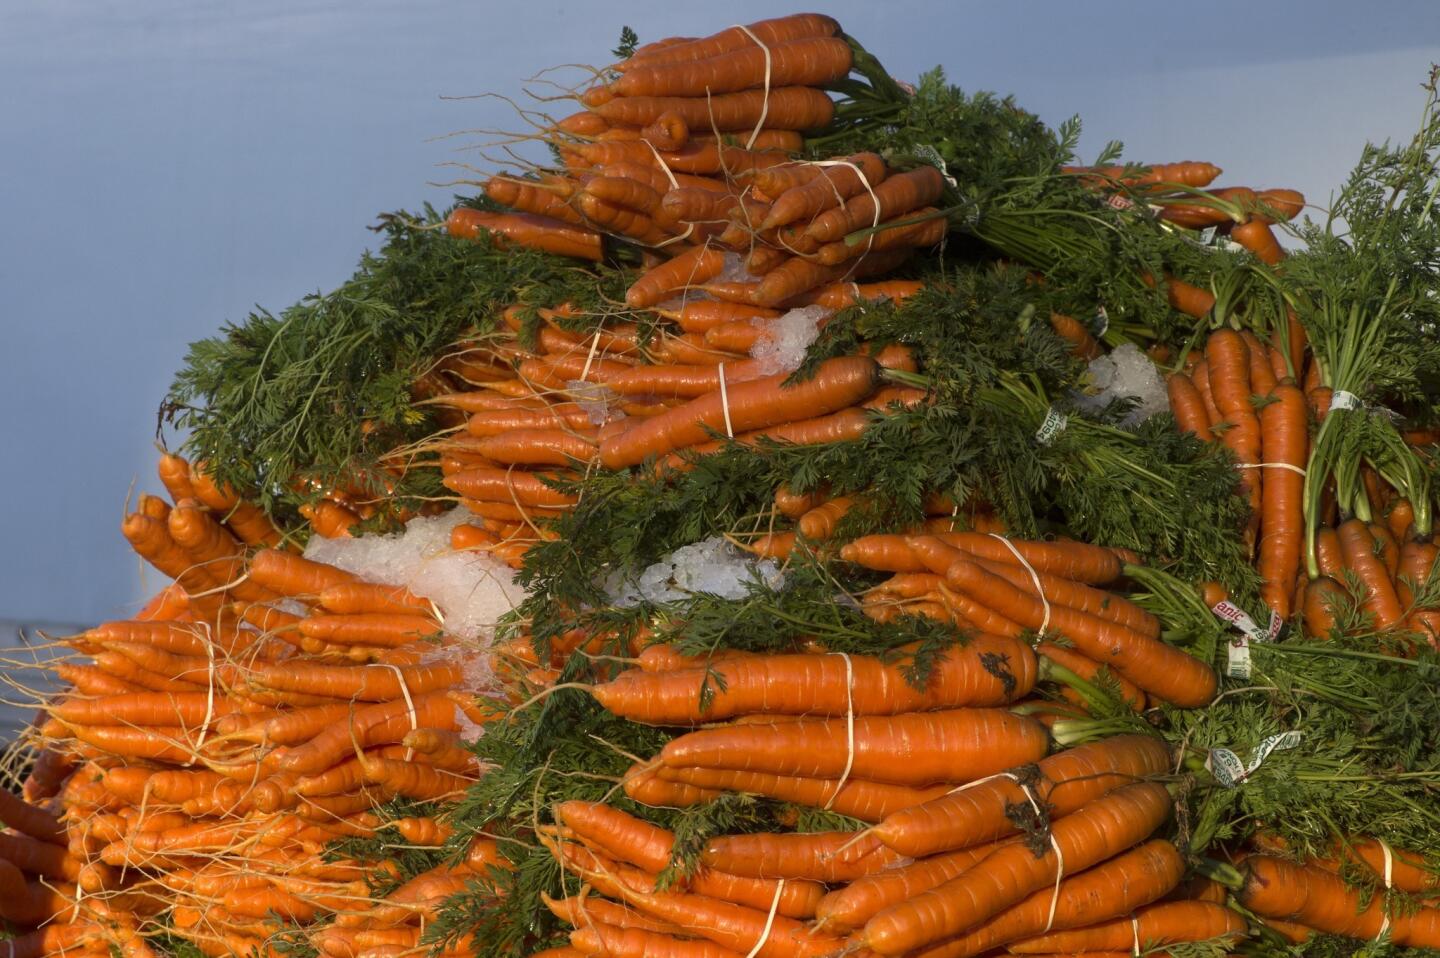 Carrots may improve sperm performance by as much as 8%.